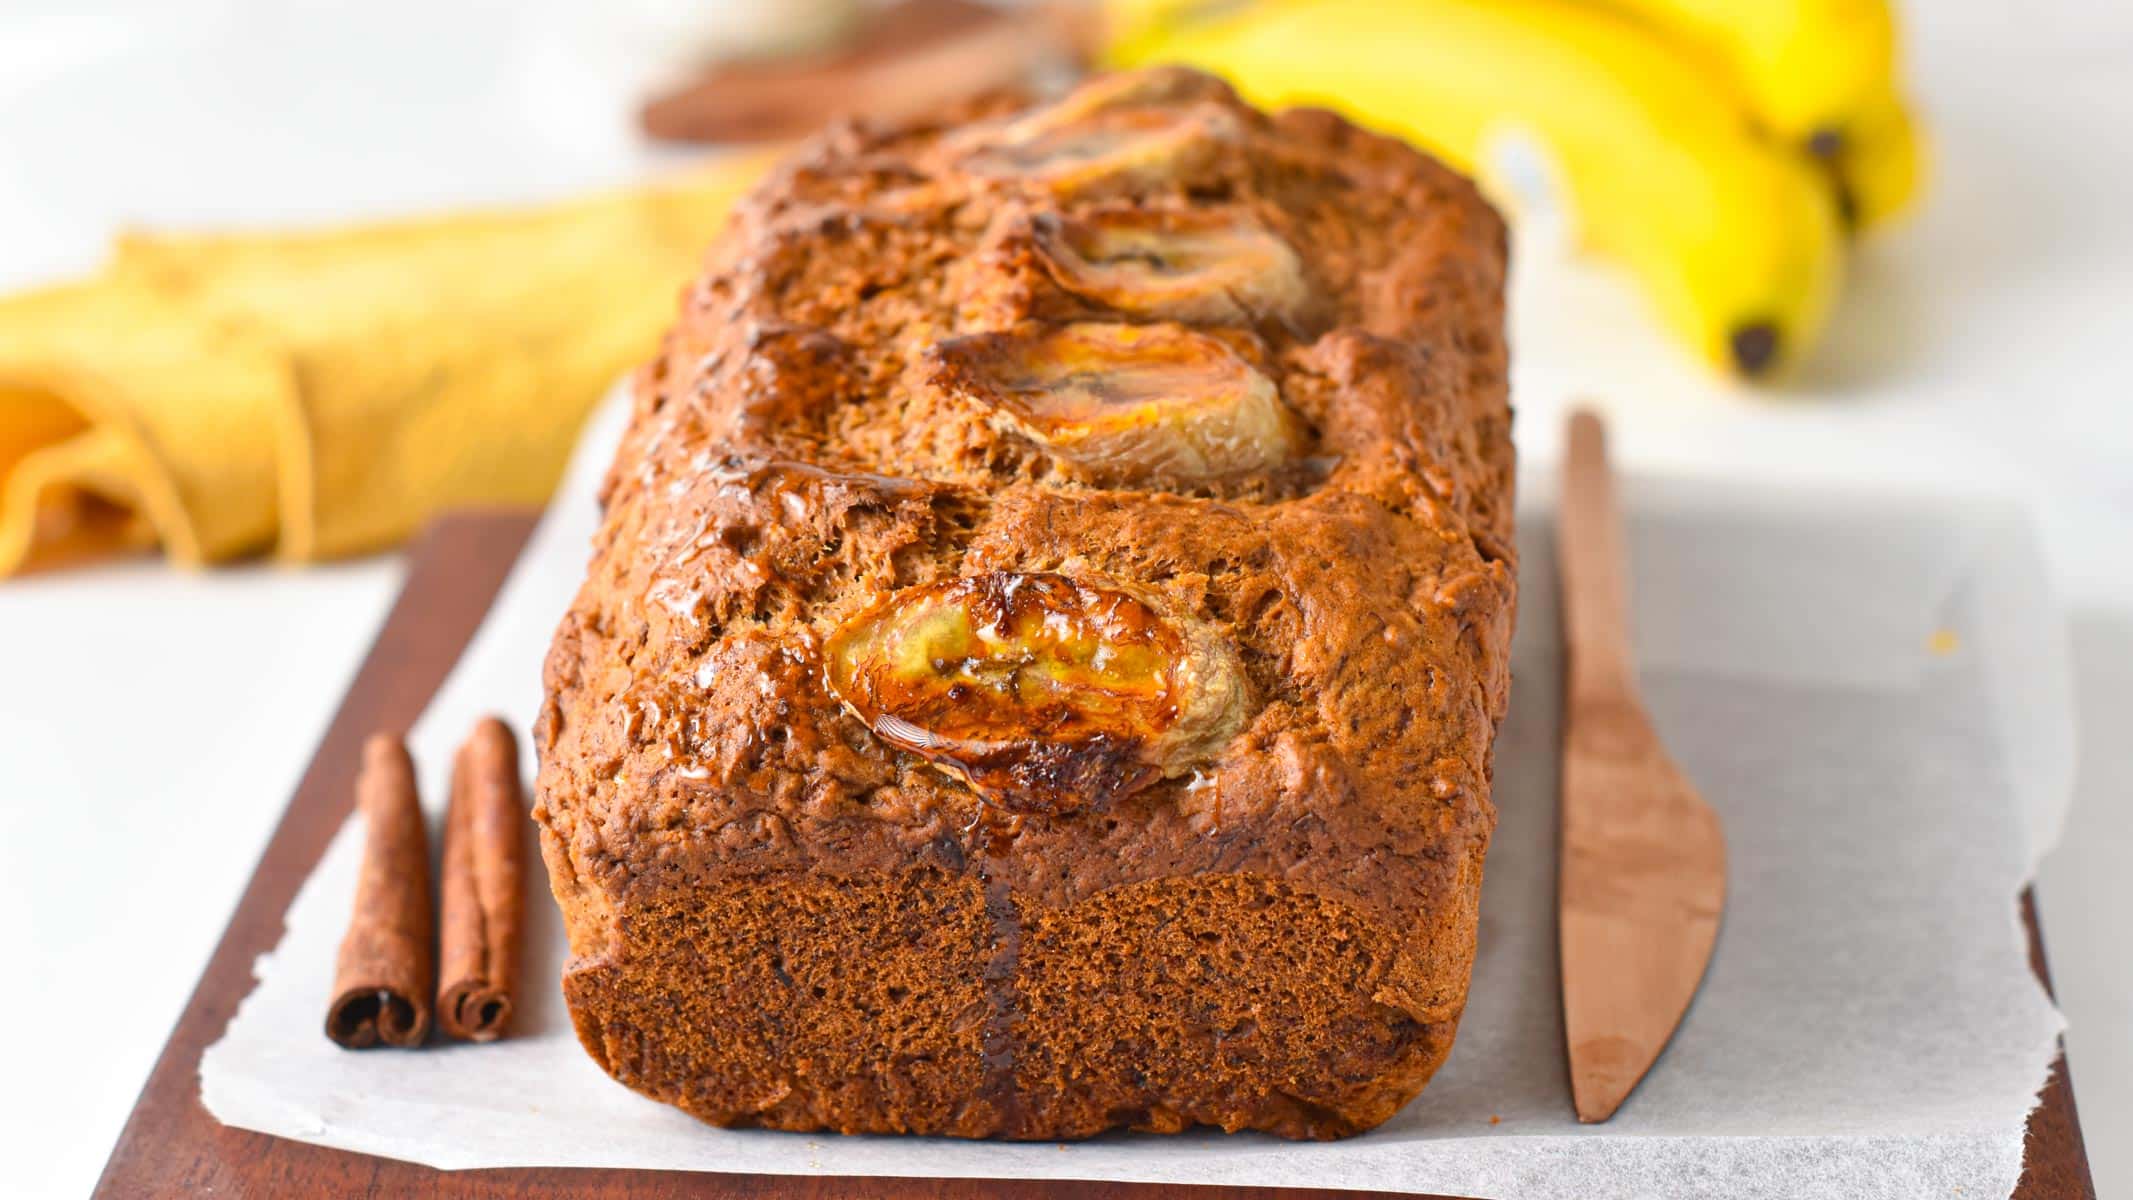 A banana bread made with spelt flour and banana slices on top on a chopping board with cinnamon sticks and a bronze knife.